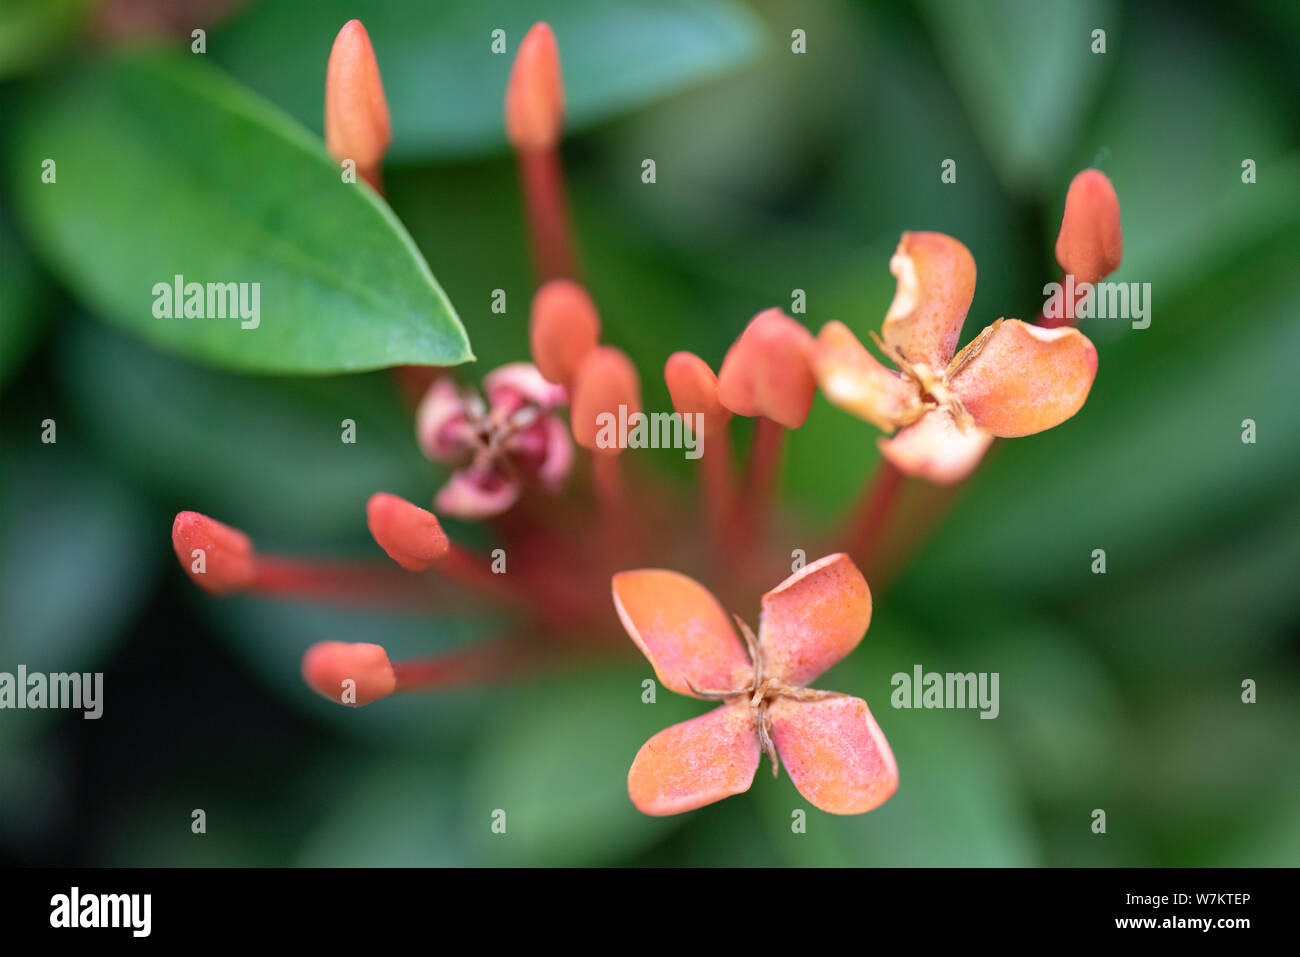 Beautiful red flowers of the plant Ixora chinensis in natural light. Close-up. Thailand, Koh Chang Island. Stock Photo